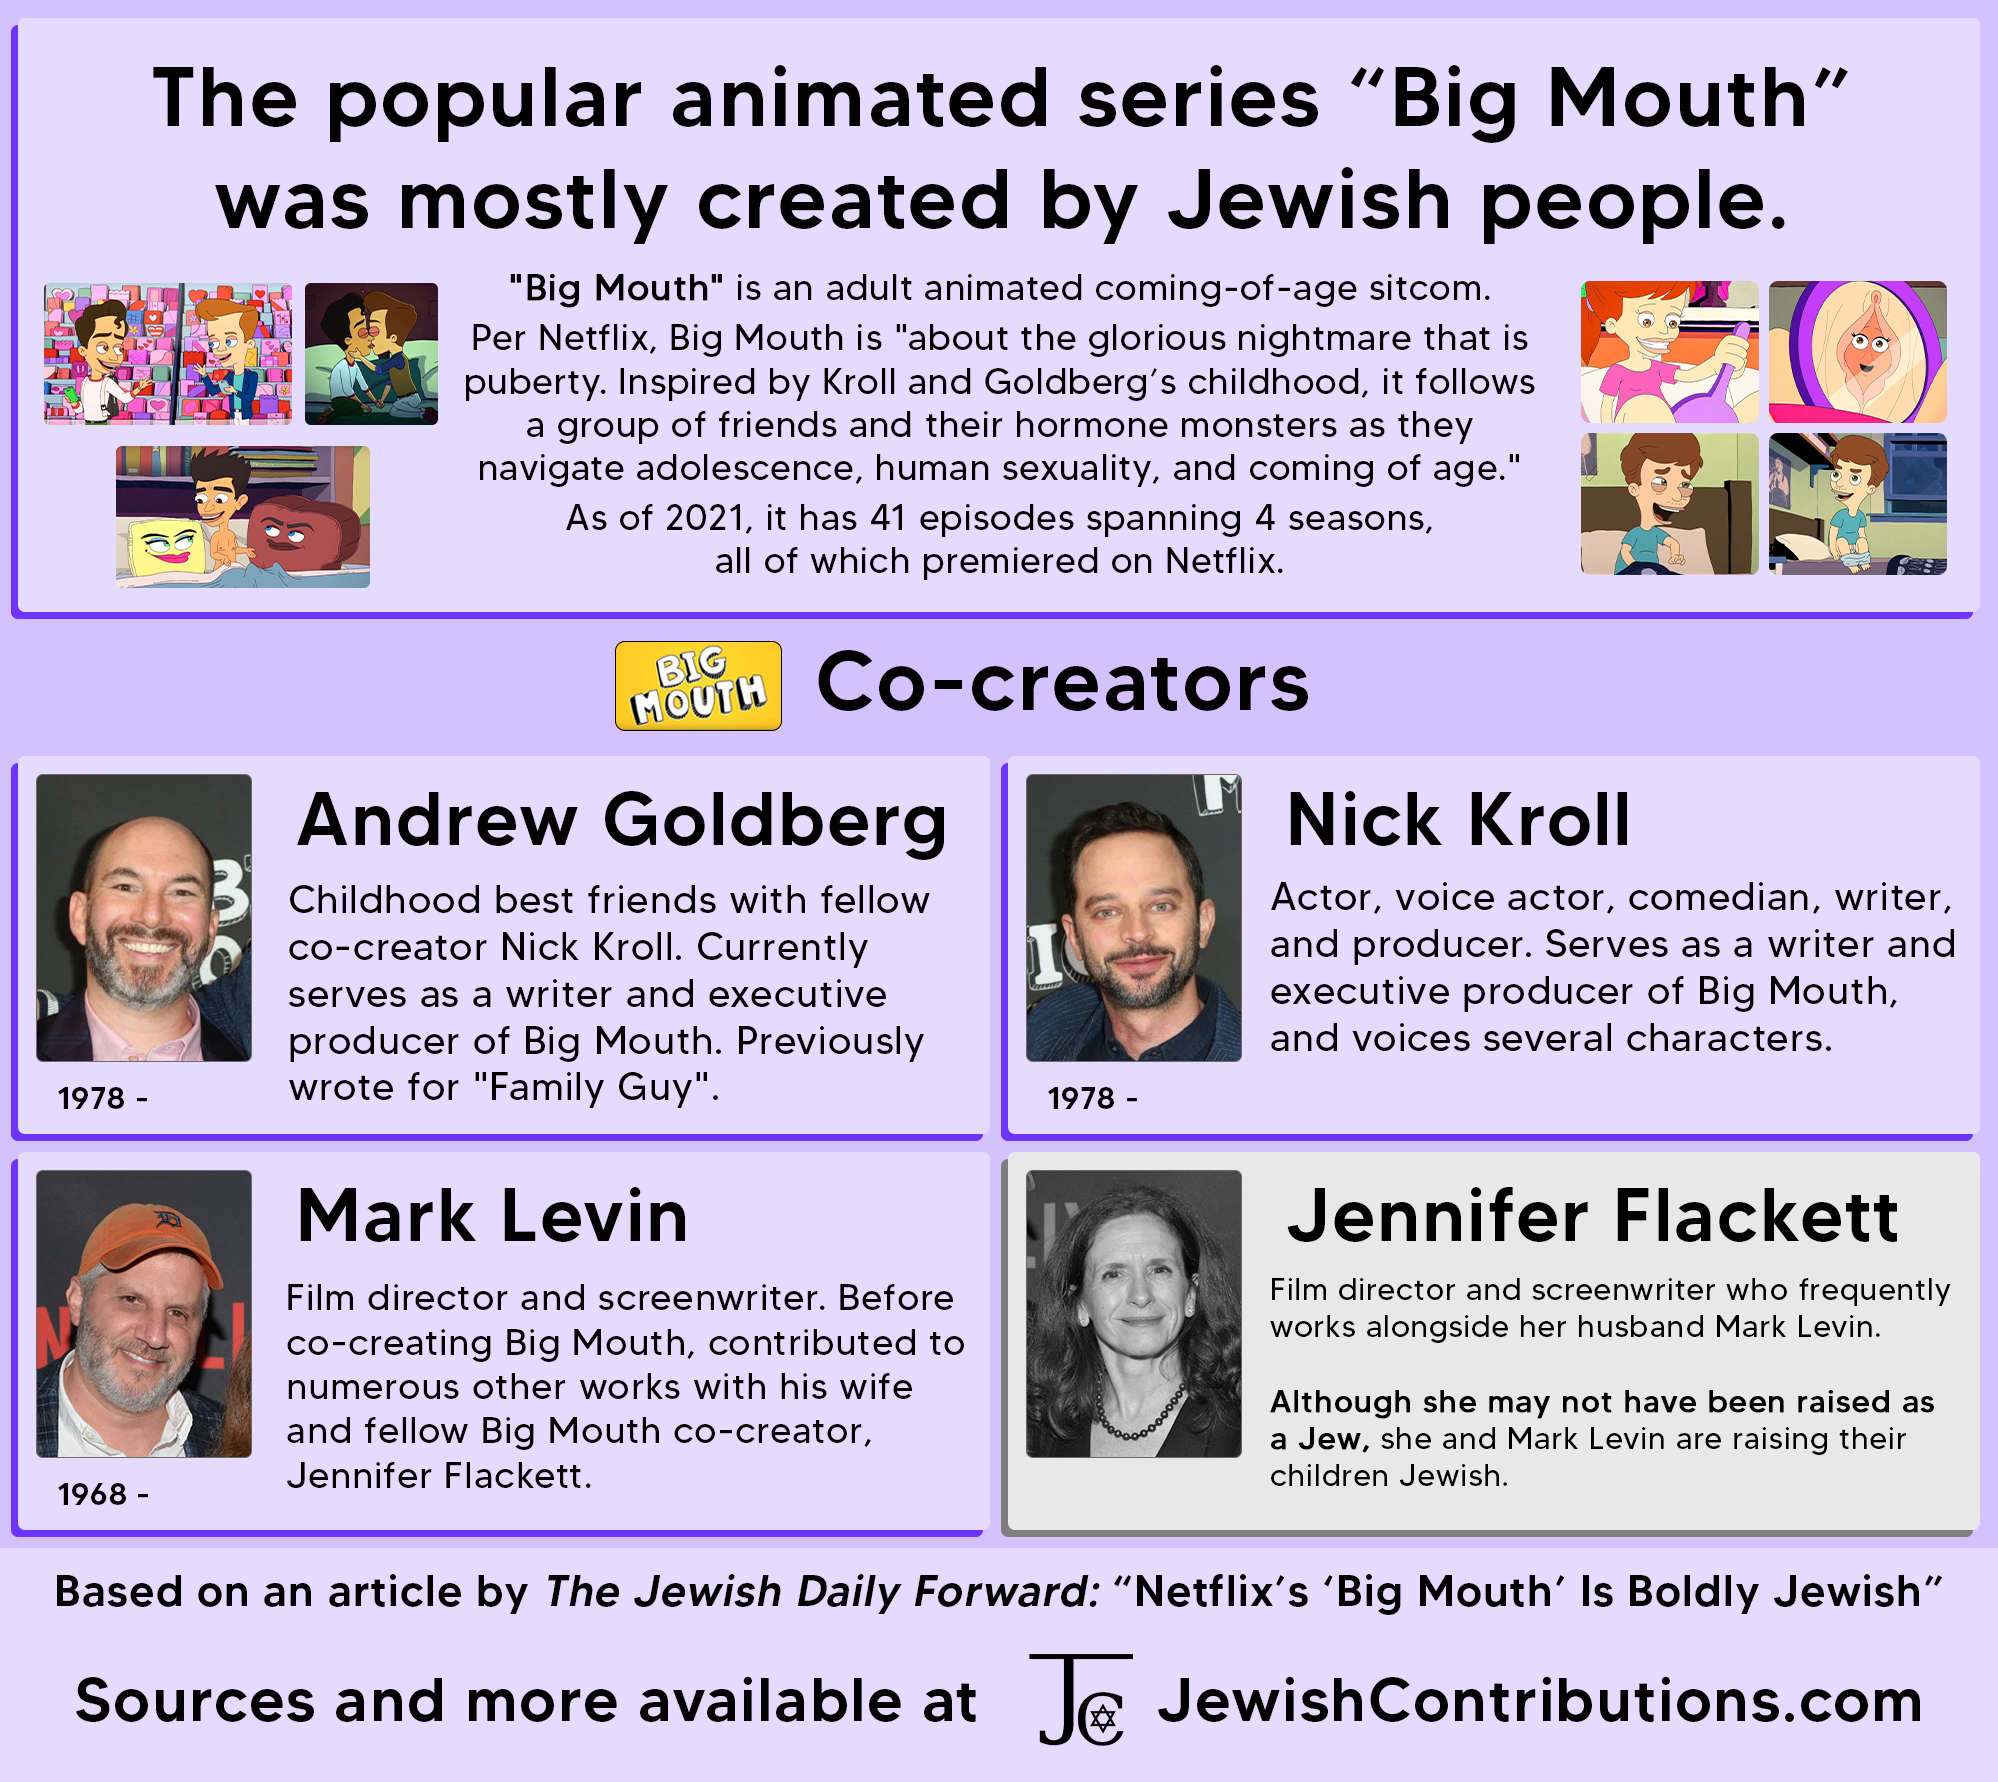 The popular animated series “Big Mouth” was mostly created by Jewish people.